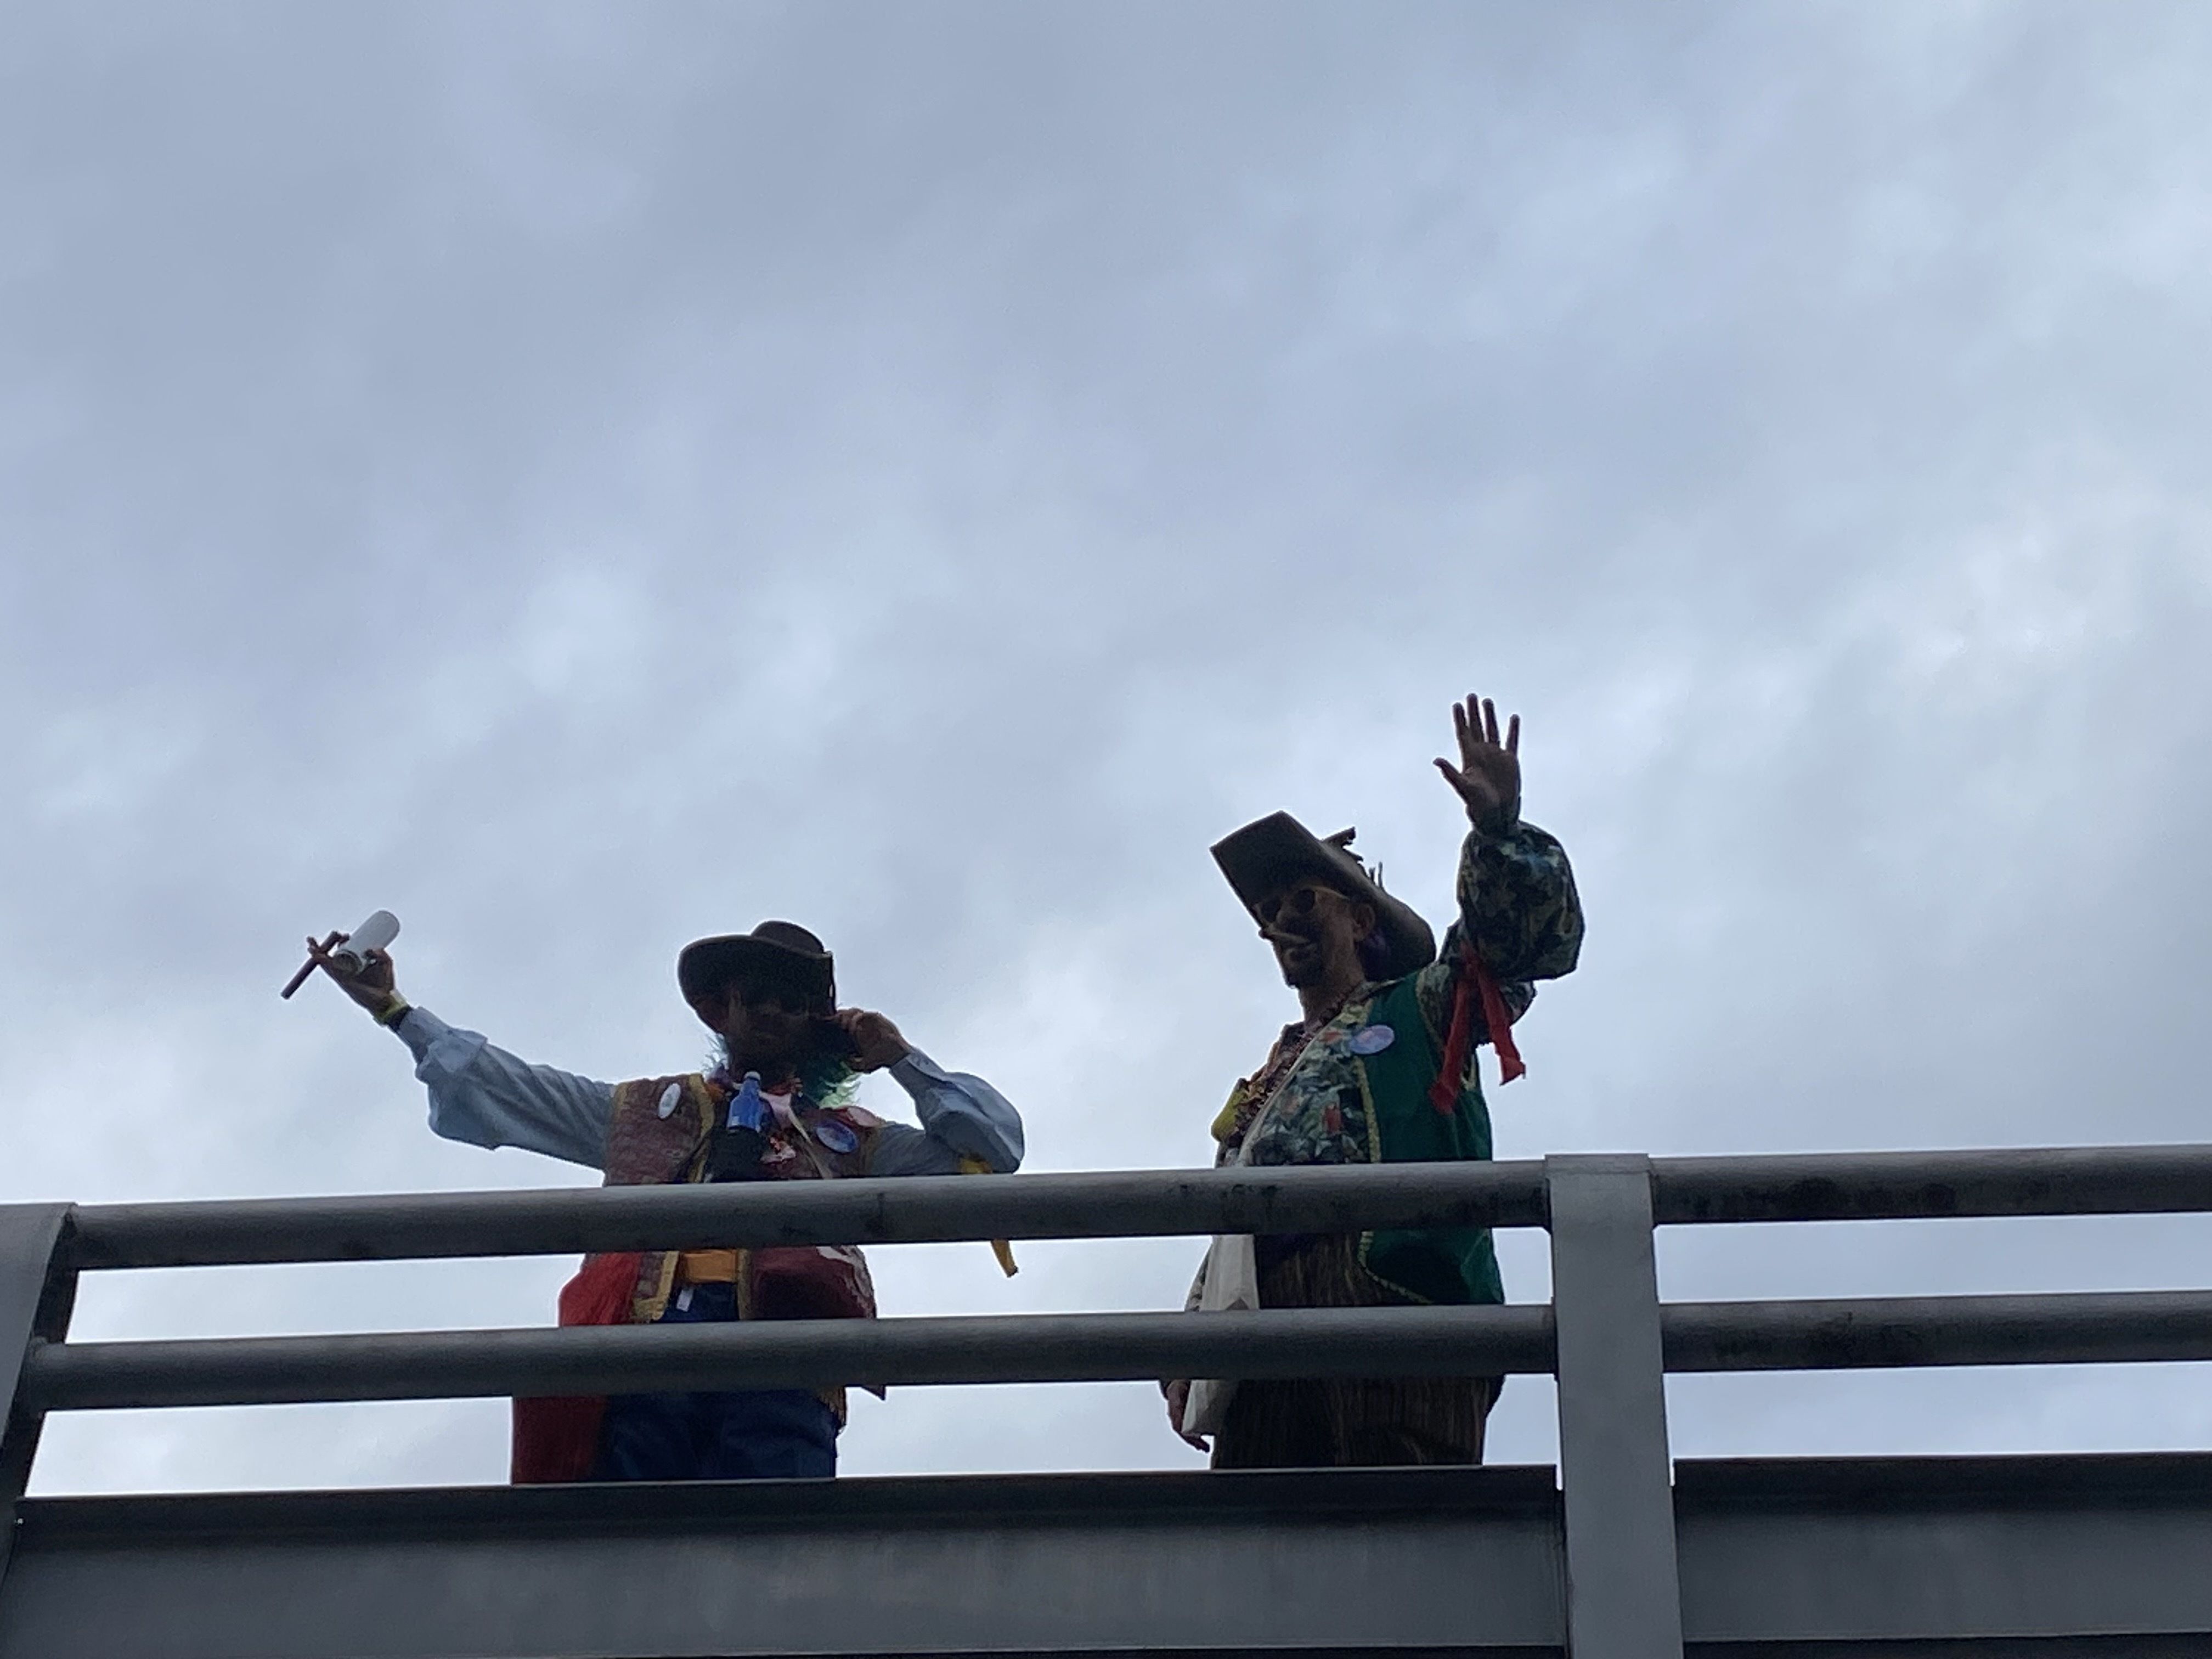 Pirates wave from a bridge.